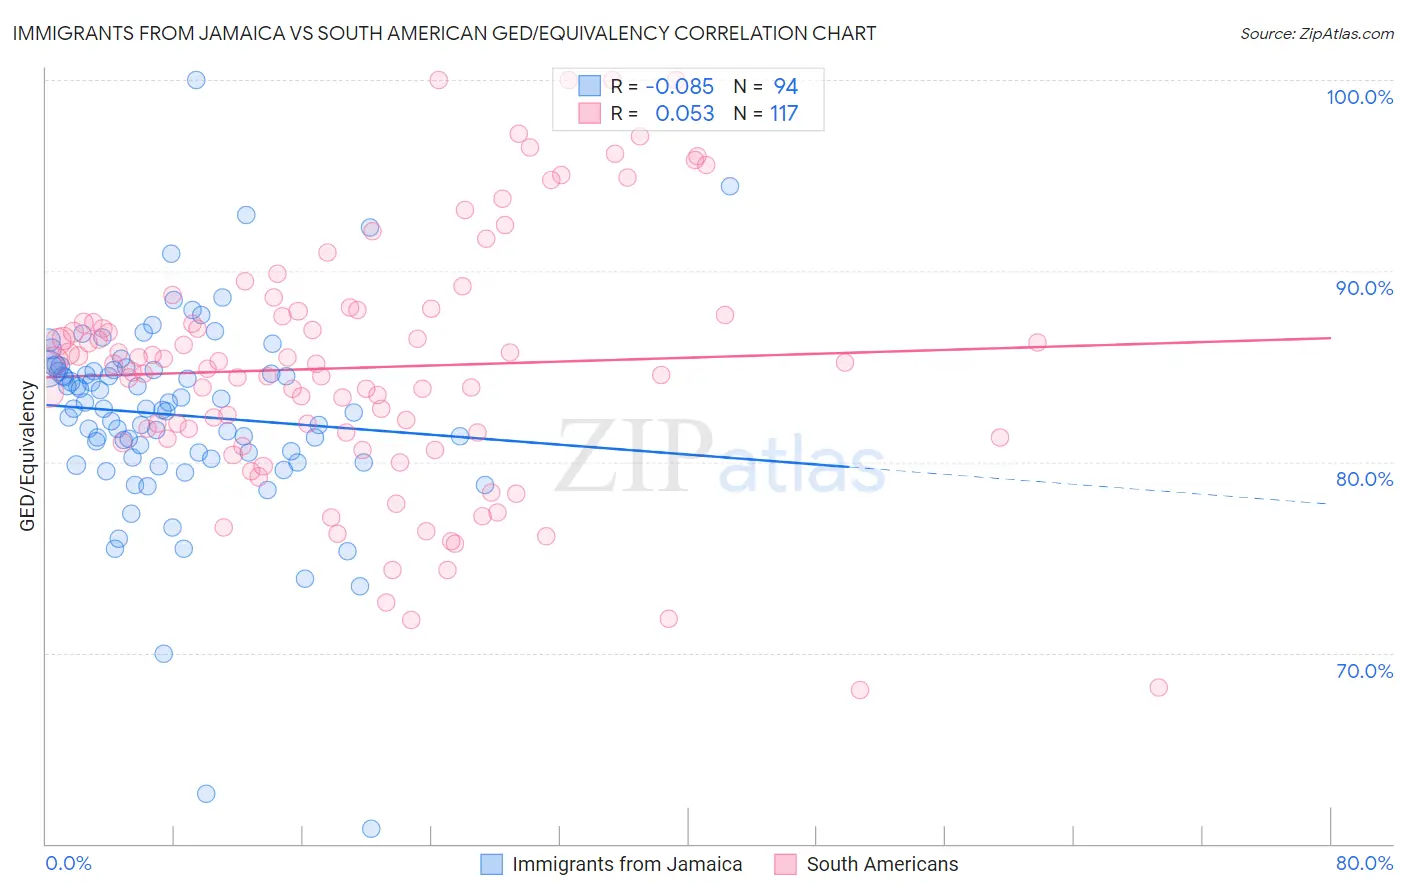 Immigrants from Jamaica vs South American GED/Equivalency